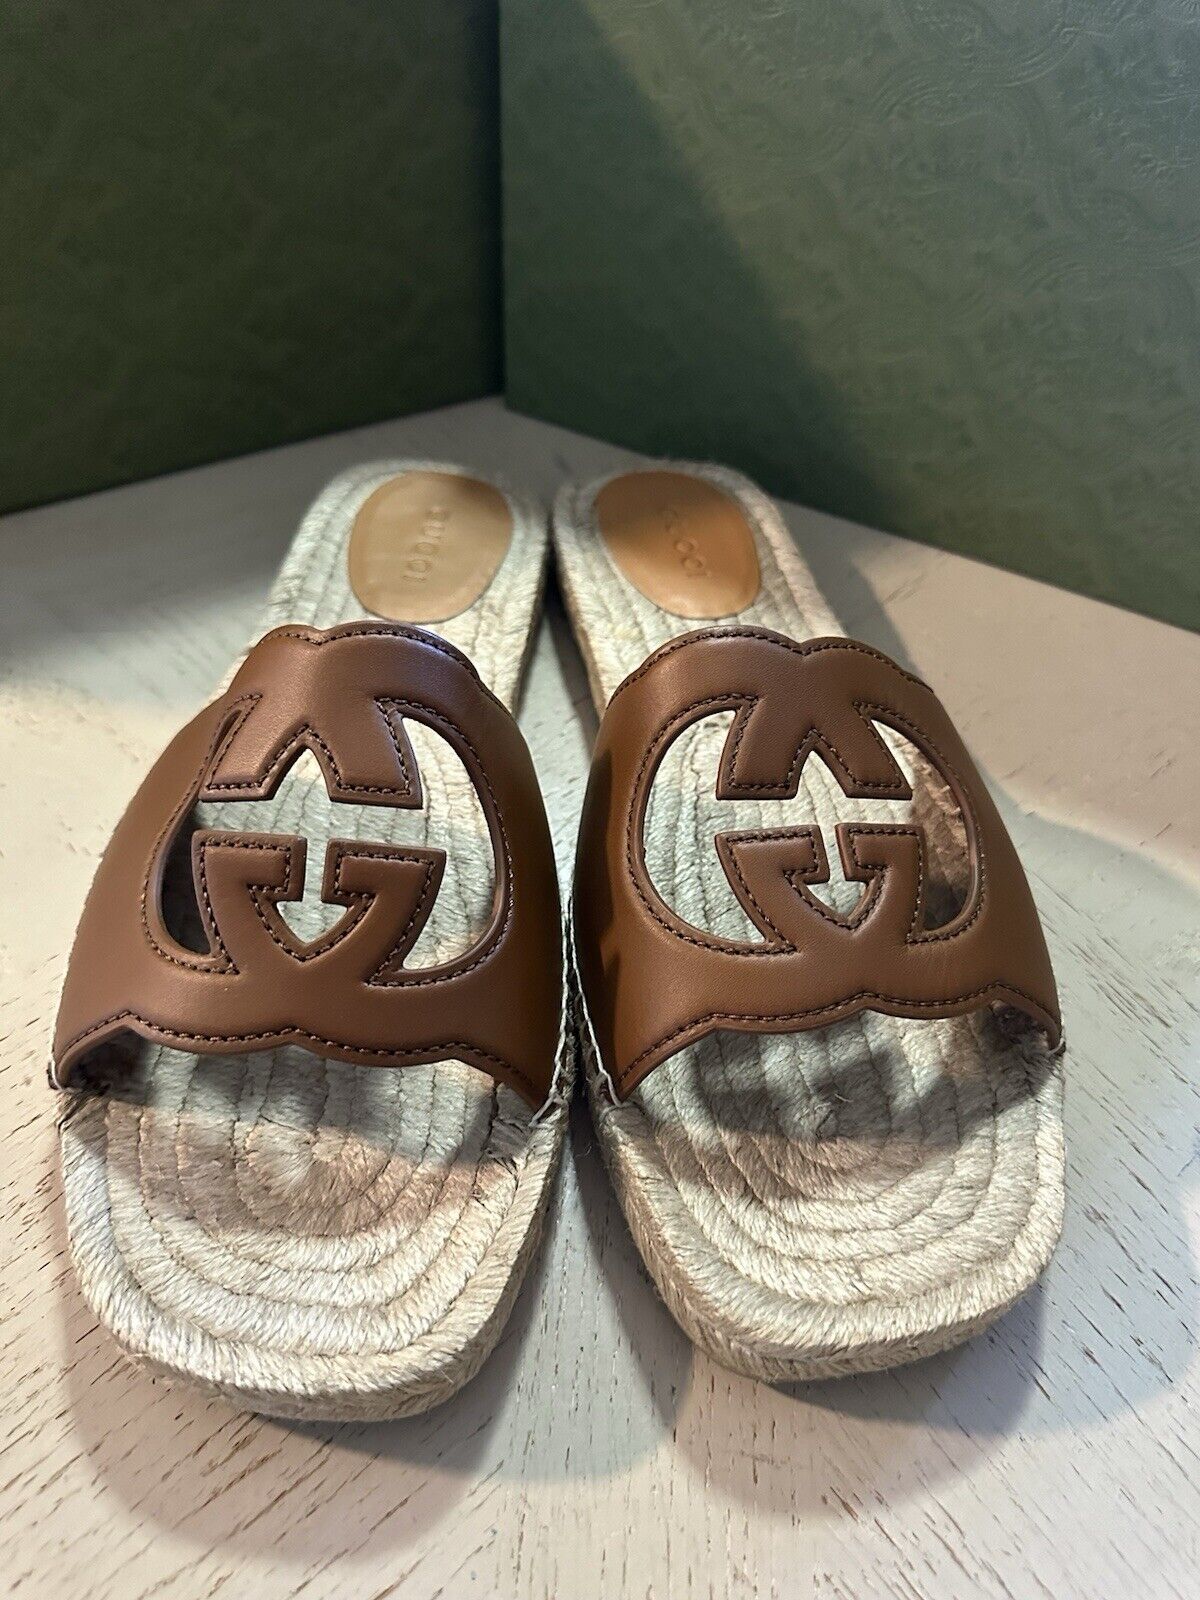 Gucci Men Leather GG Espadrille Sandal Shoes Brown 14 US/13 UK 725260 New